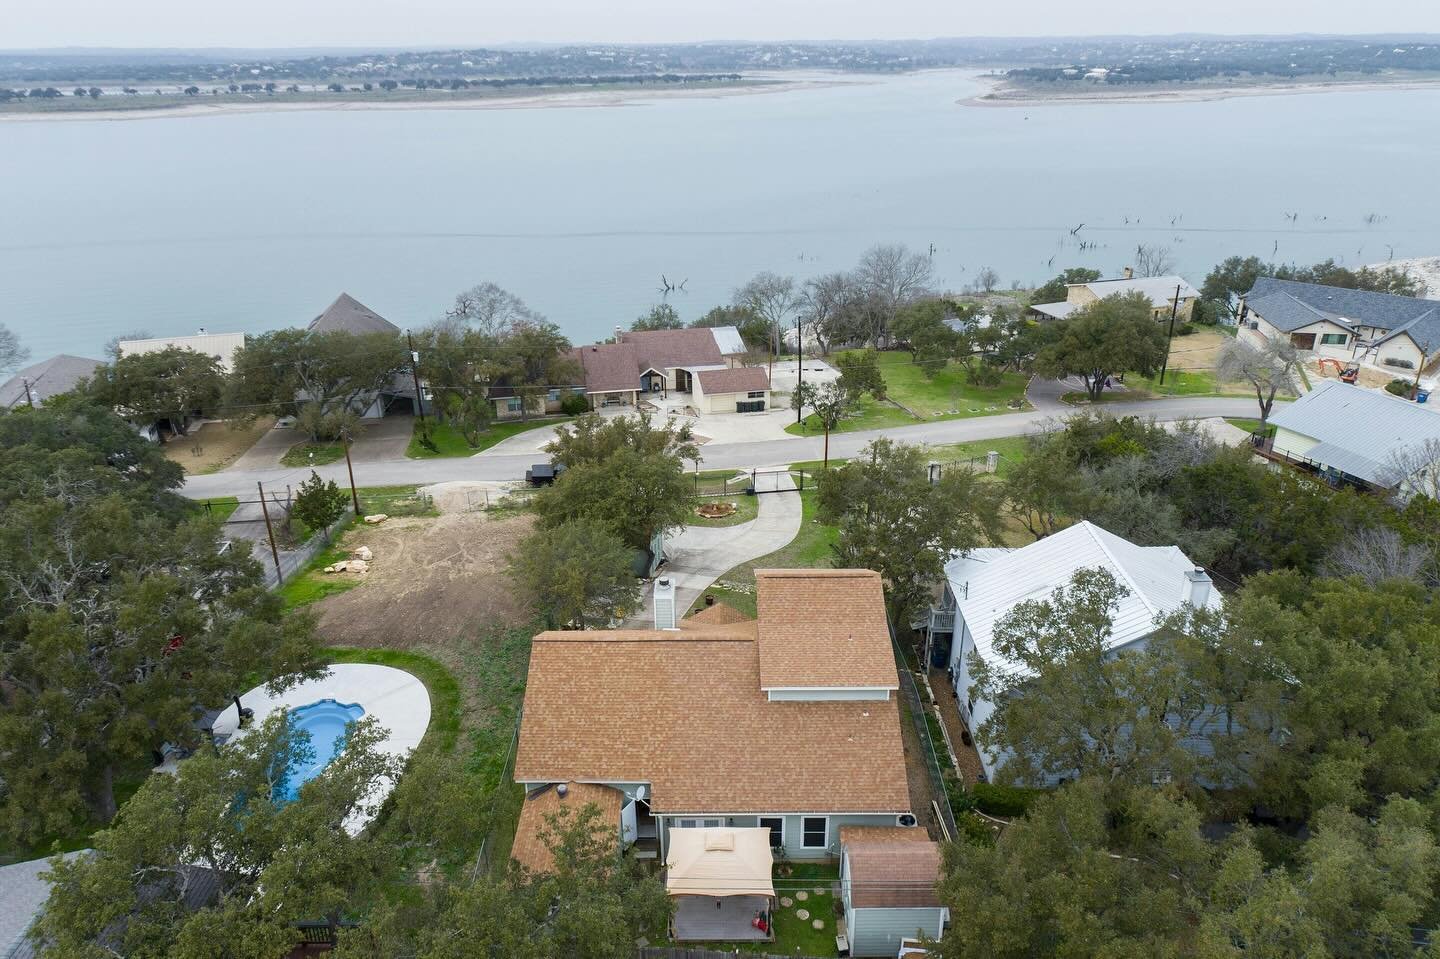 Fantastic Investment property opportunity facing Canyon Lake. Beautiful waterfront view from the large front porch. Plenty of storage and family play areas. Added bonus room on top of garage well suited for a guest suite not conveyed in original squa